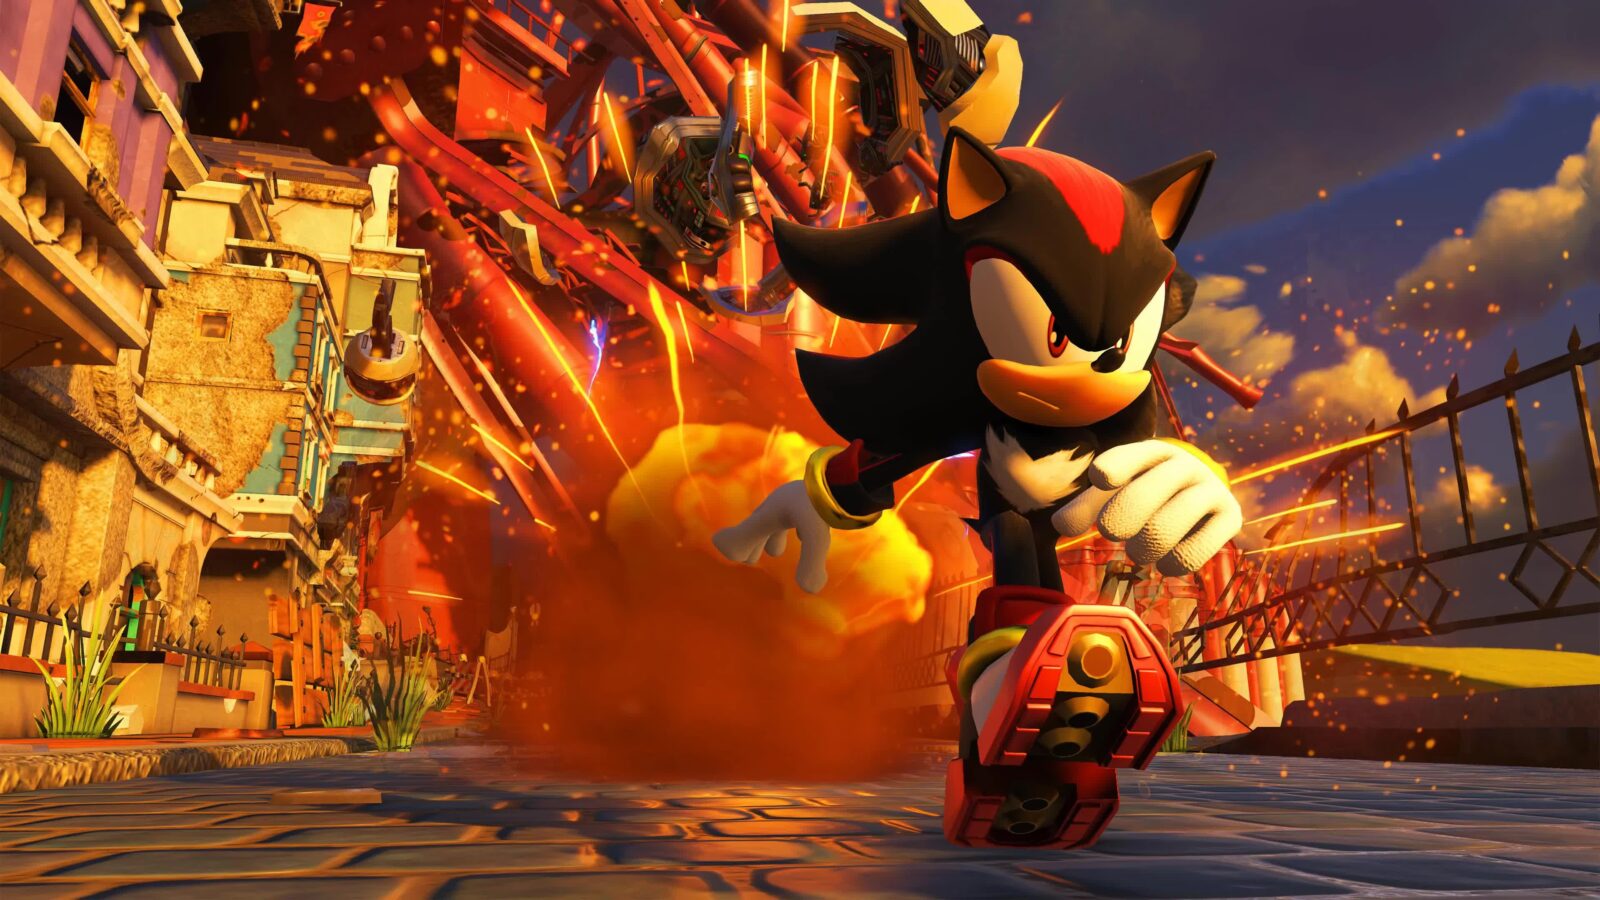 LiveWallpapers4Free.com | Sonic Forces 4K Quality - Free Live Wallpaper